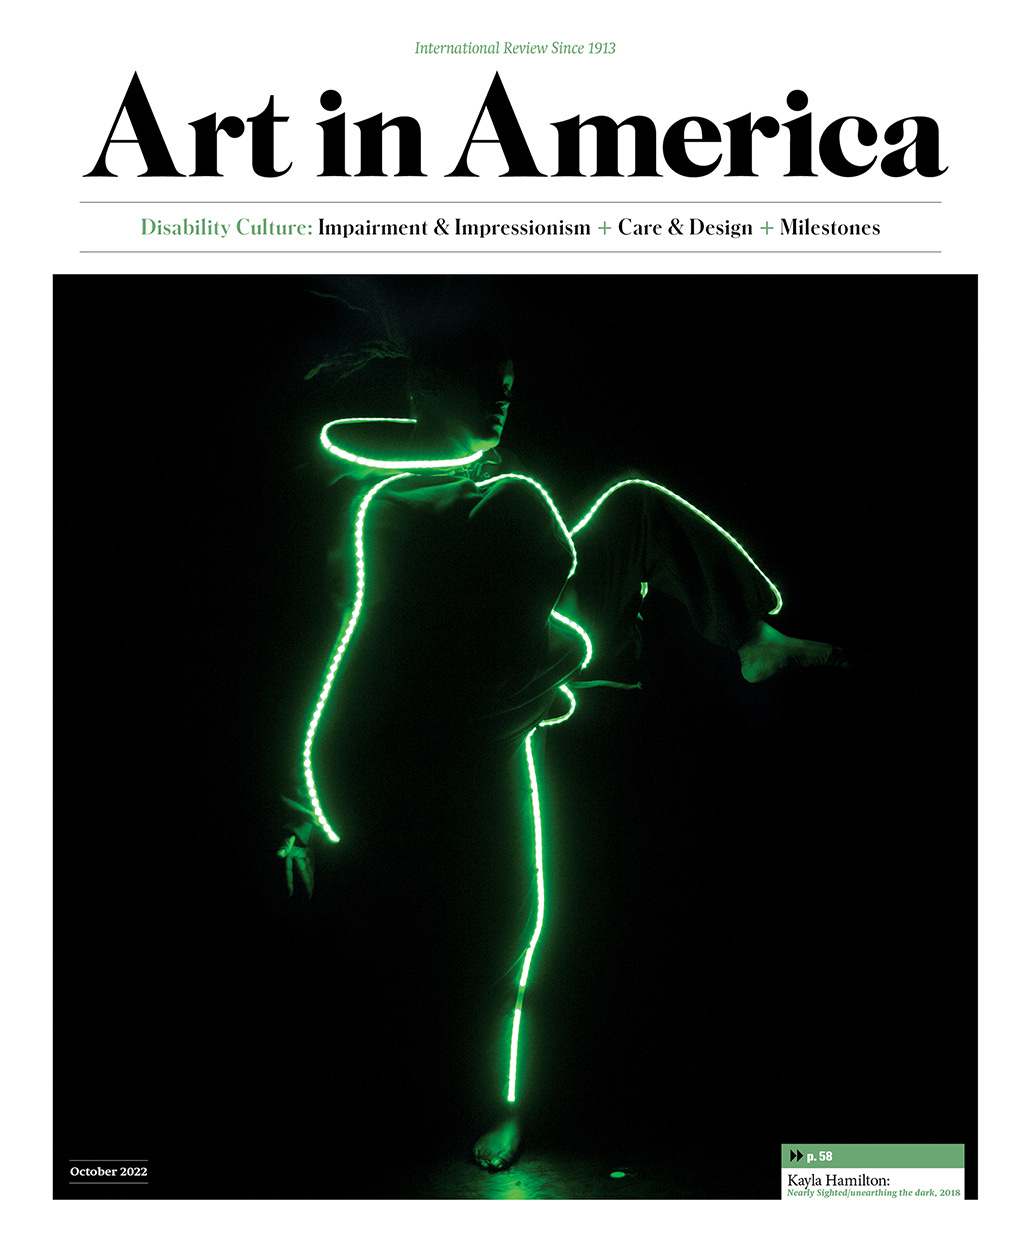 Magazine cover shows a person dancing in the dark with green lights outlining her body parts. She has her left knee up in the air and is leaning right. Top says Art in Ameria Disability Culture Impairment & Impressionism + Care & Design + Milestones